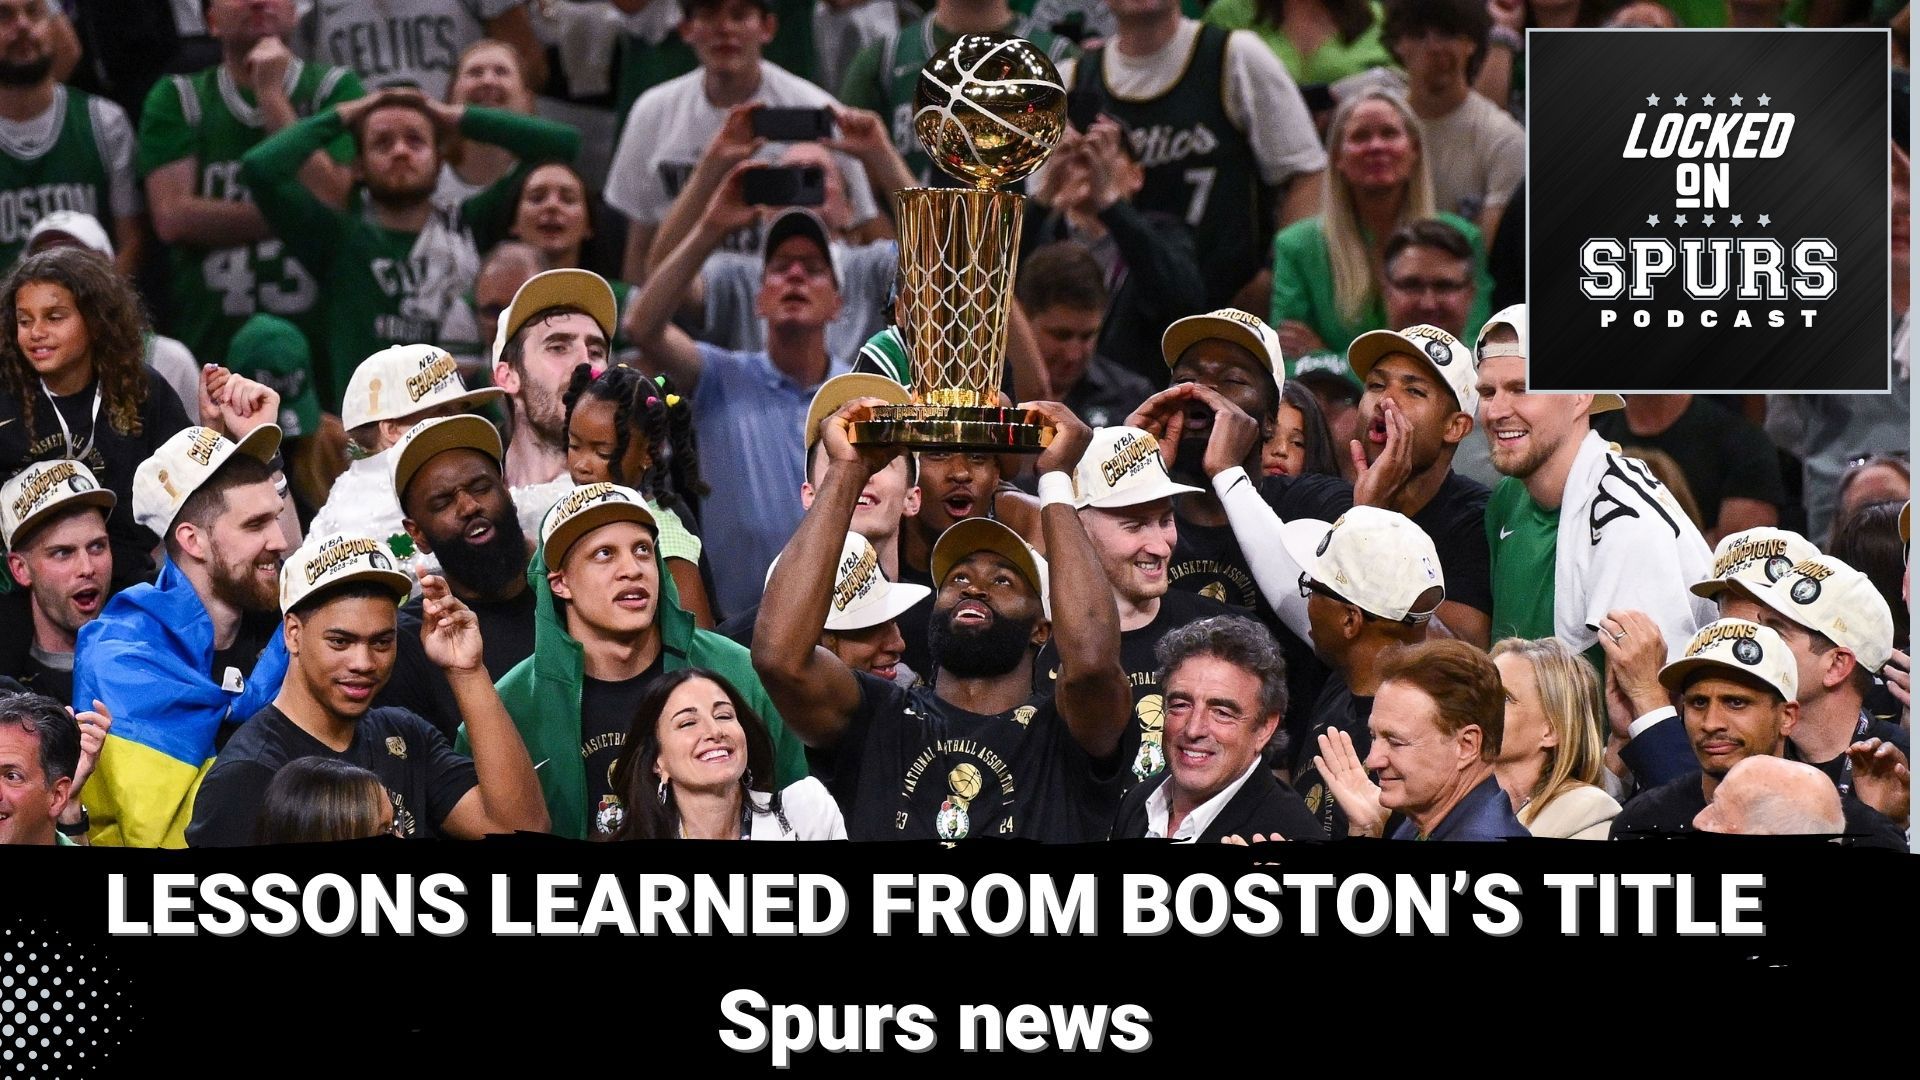 Also, we catch you up on some Spurs news and notes.